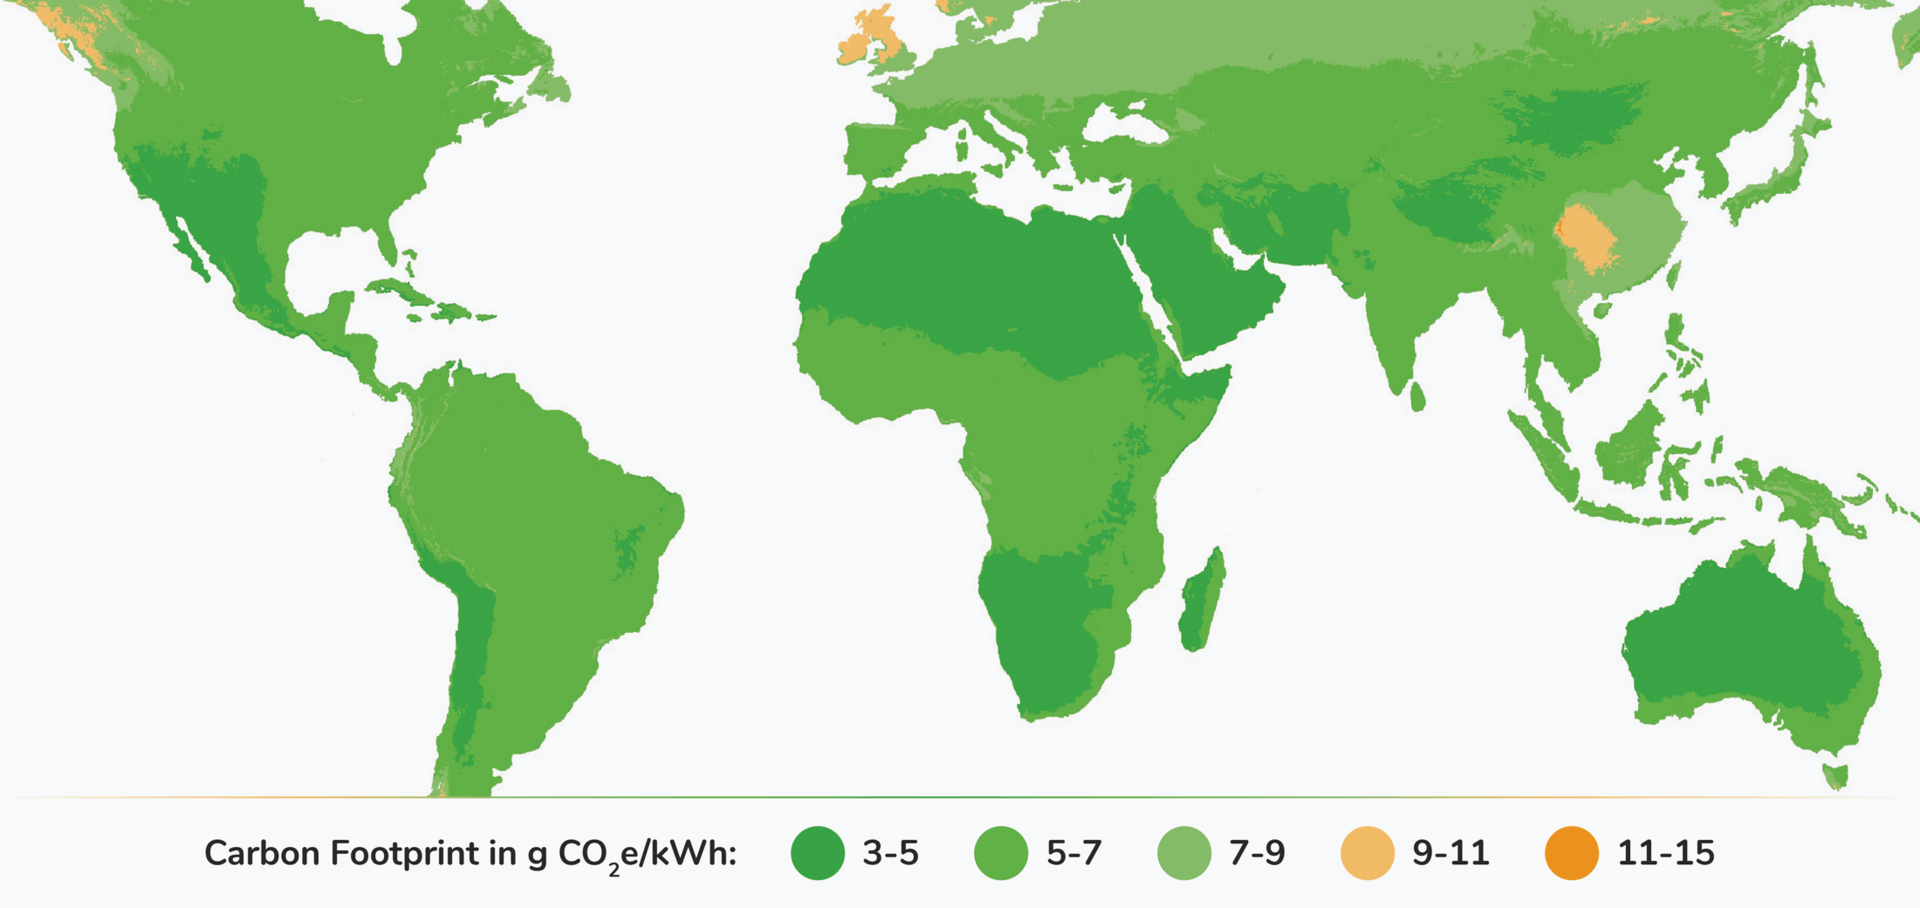 World map with carbon footprint in grams of CO2e per kilowatt hour